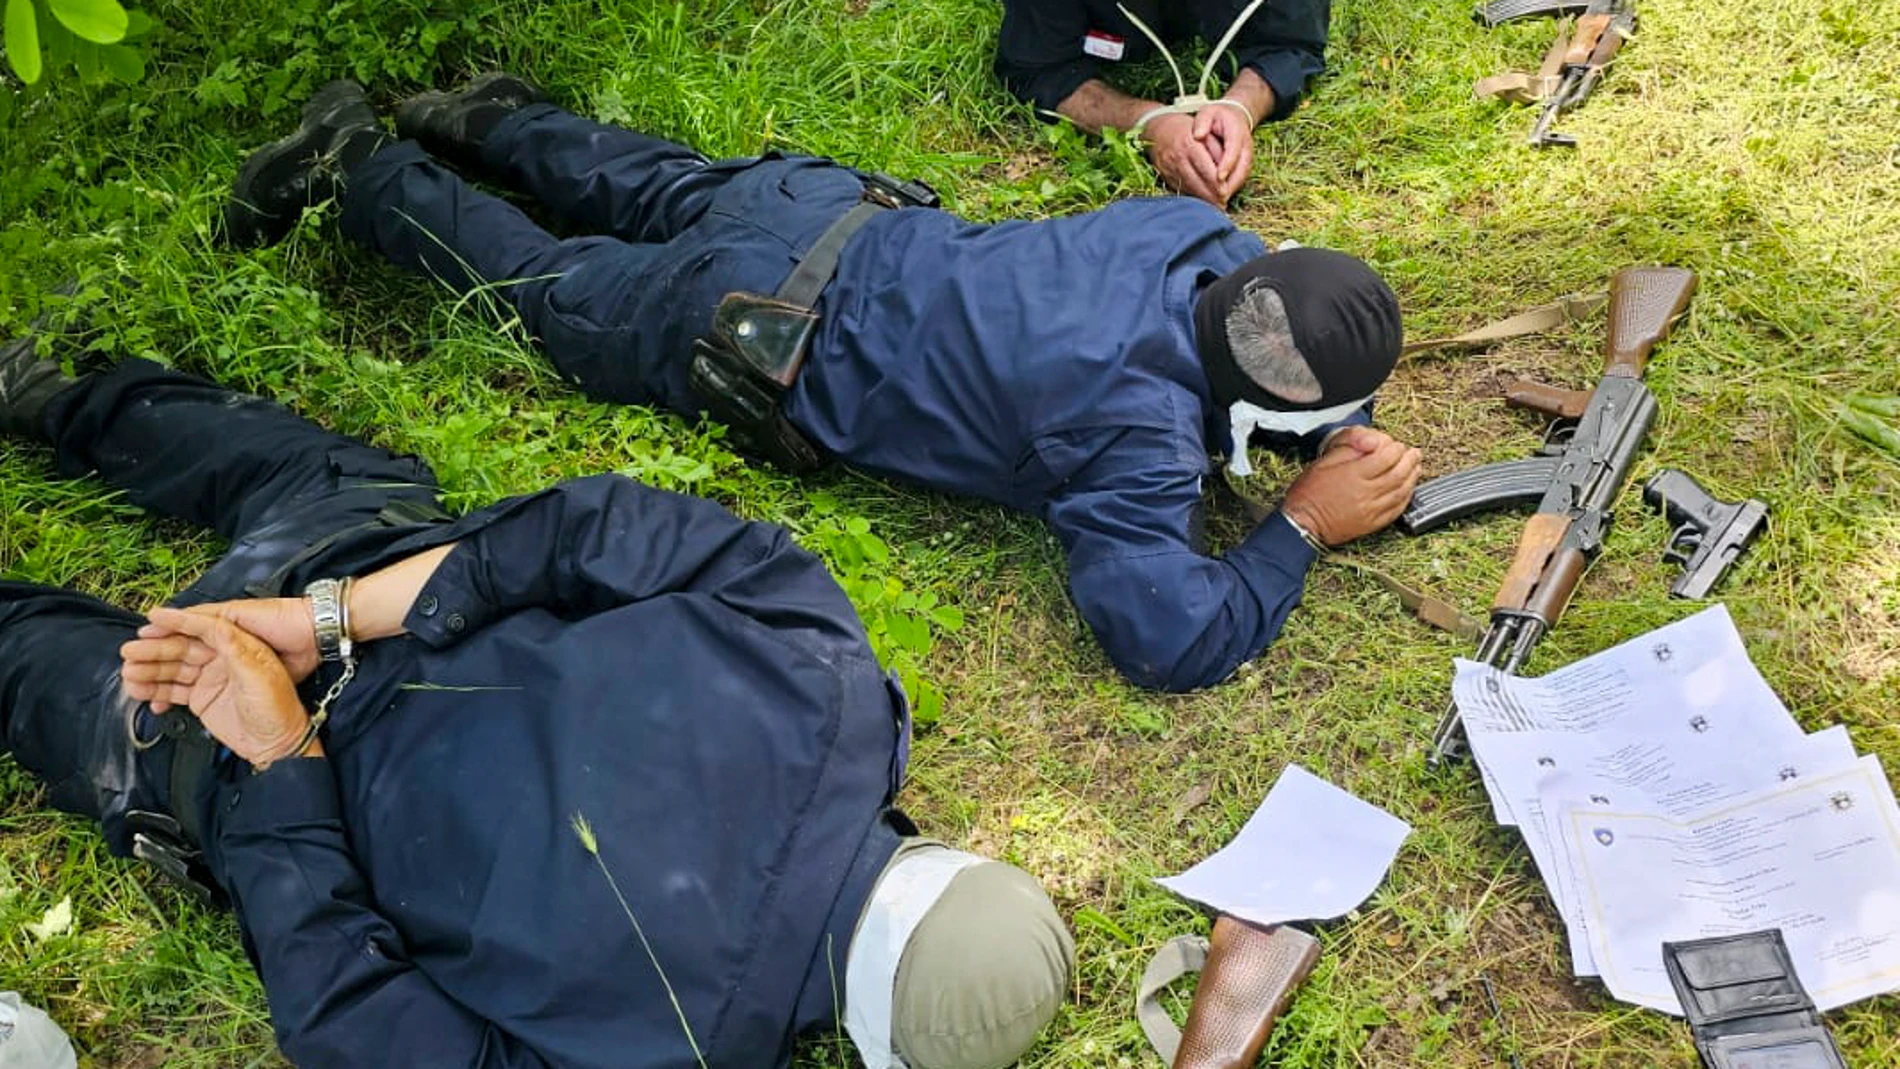 In this photo provided by the Serbian Ministry of Interior, a three Kosovo police officers captured by Serbian police officers lying face down on a field, on Wednesday, June 14, 2023. Serbian authorities said Wednesday they have captured three "fully armed" Kosovo police officers inside Serbia near their mutual border, while Kosovo police said they have likely been "kidnapped" on Kosovo territory as they patrolled the area. (Serbian Ministry of Interior via AP)